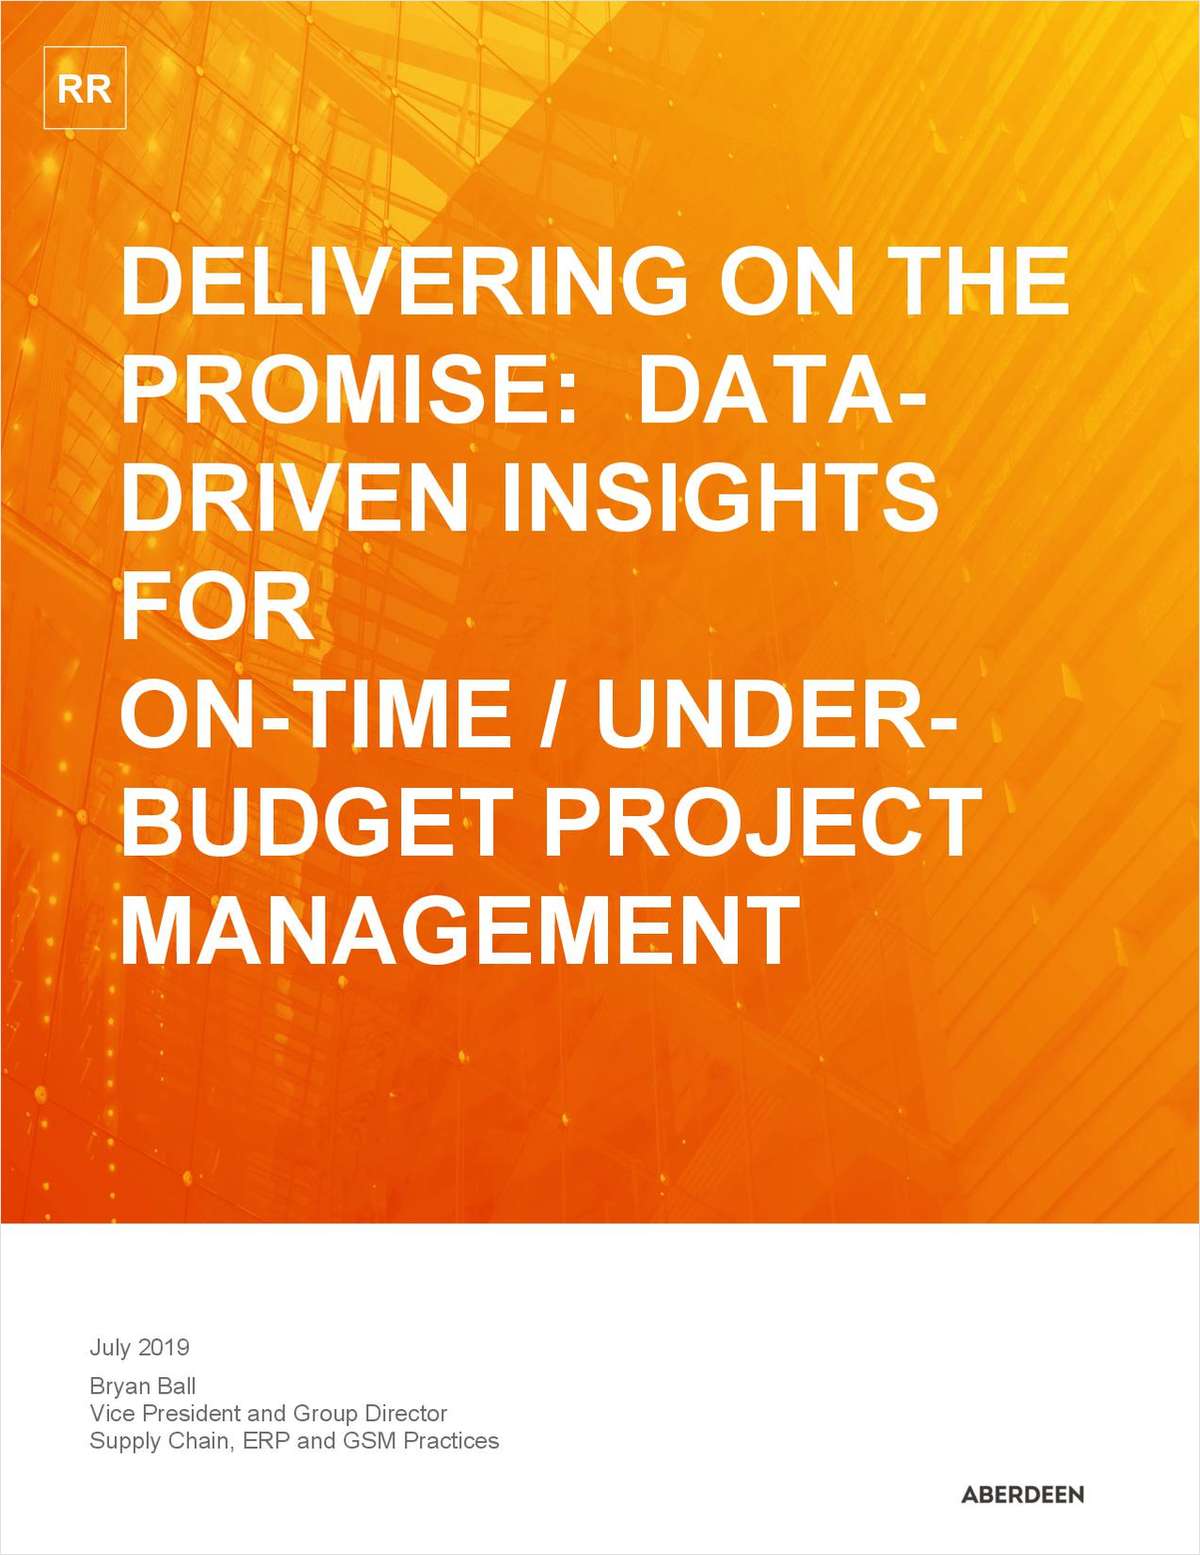 Delivering on the Promise: Data-Driven Insights for On-Time/Under-Budget Project Management